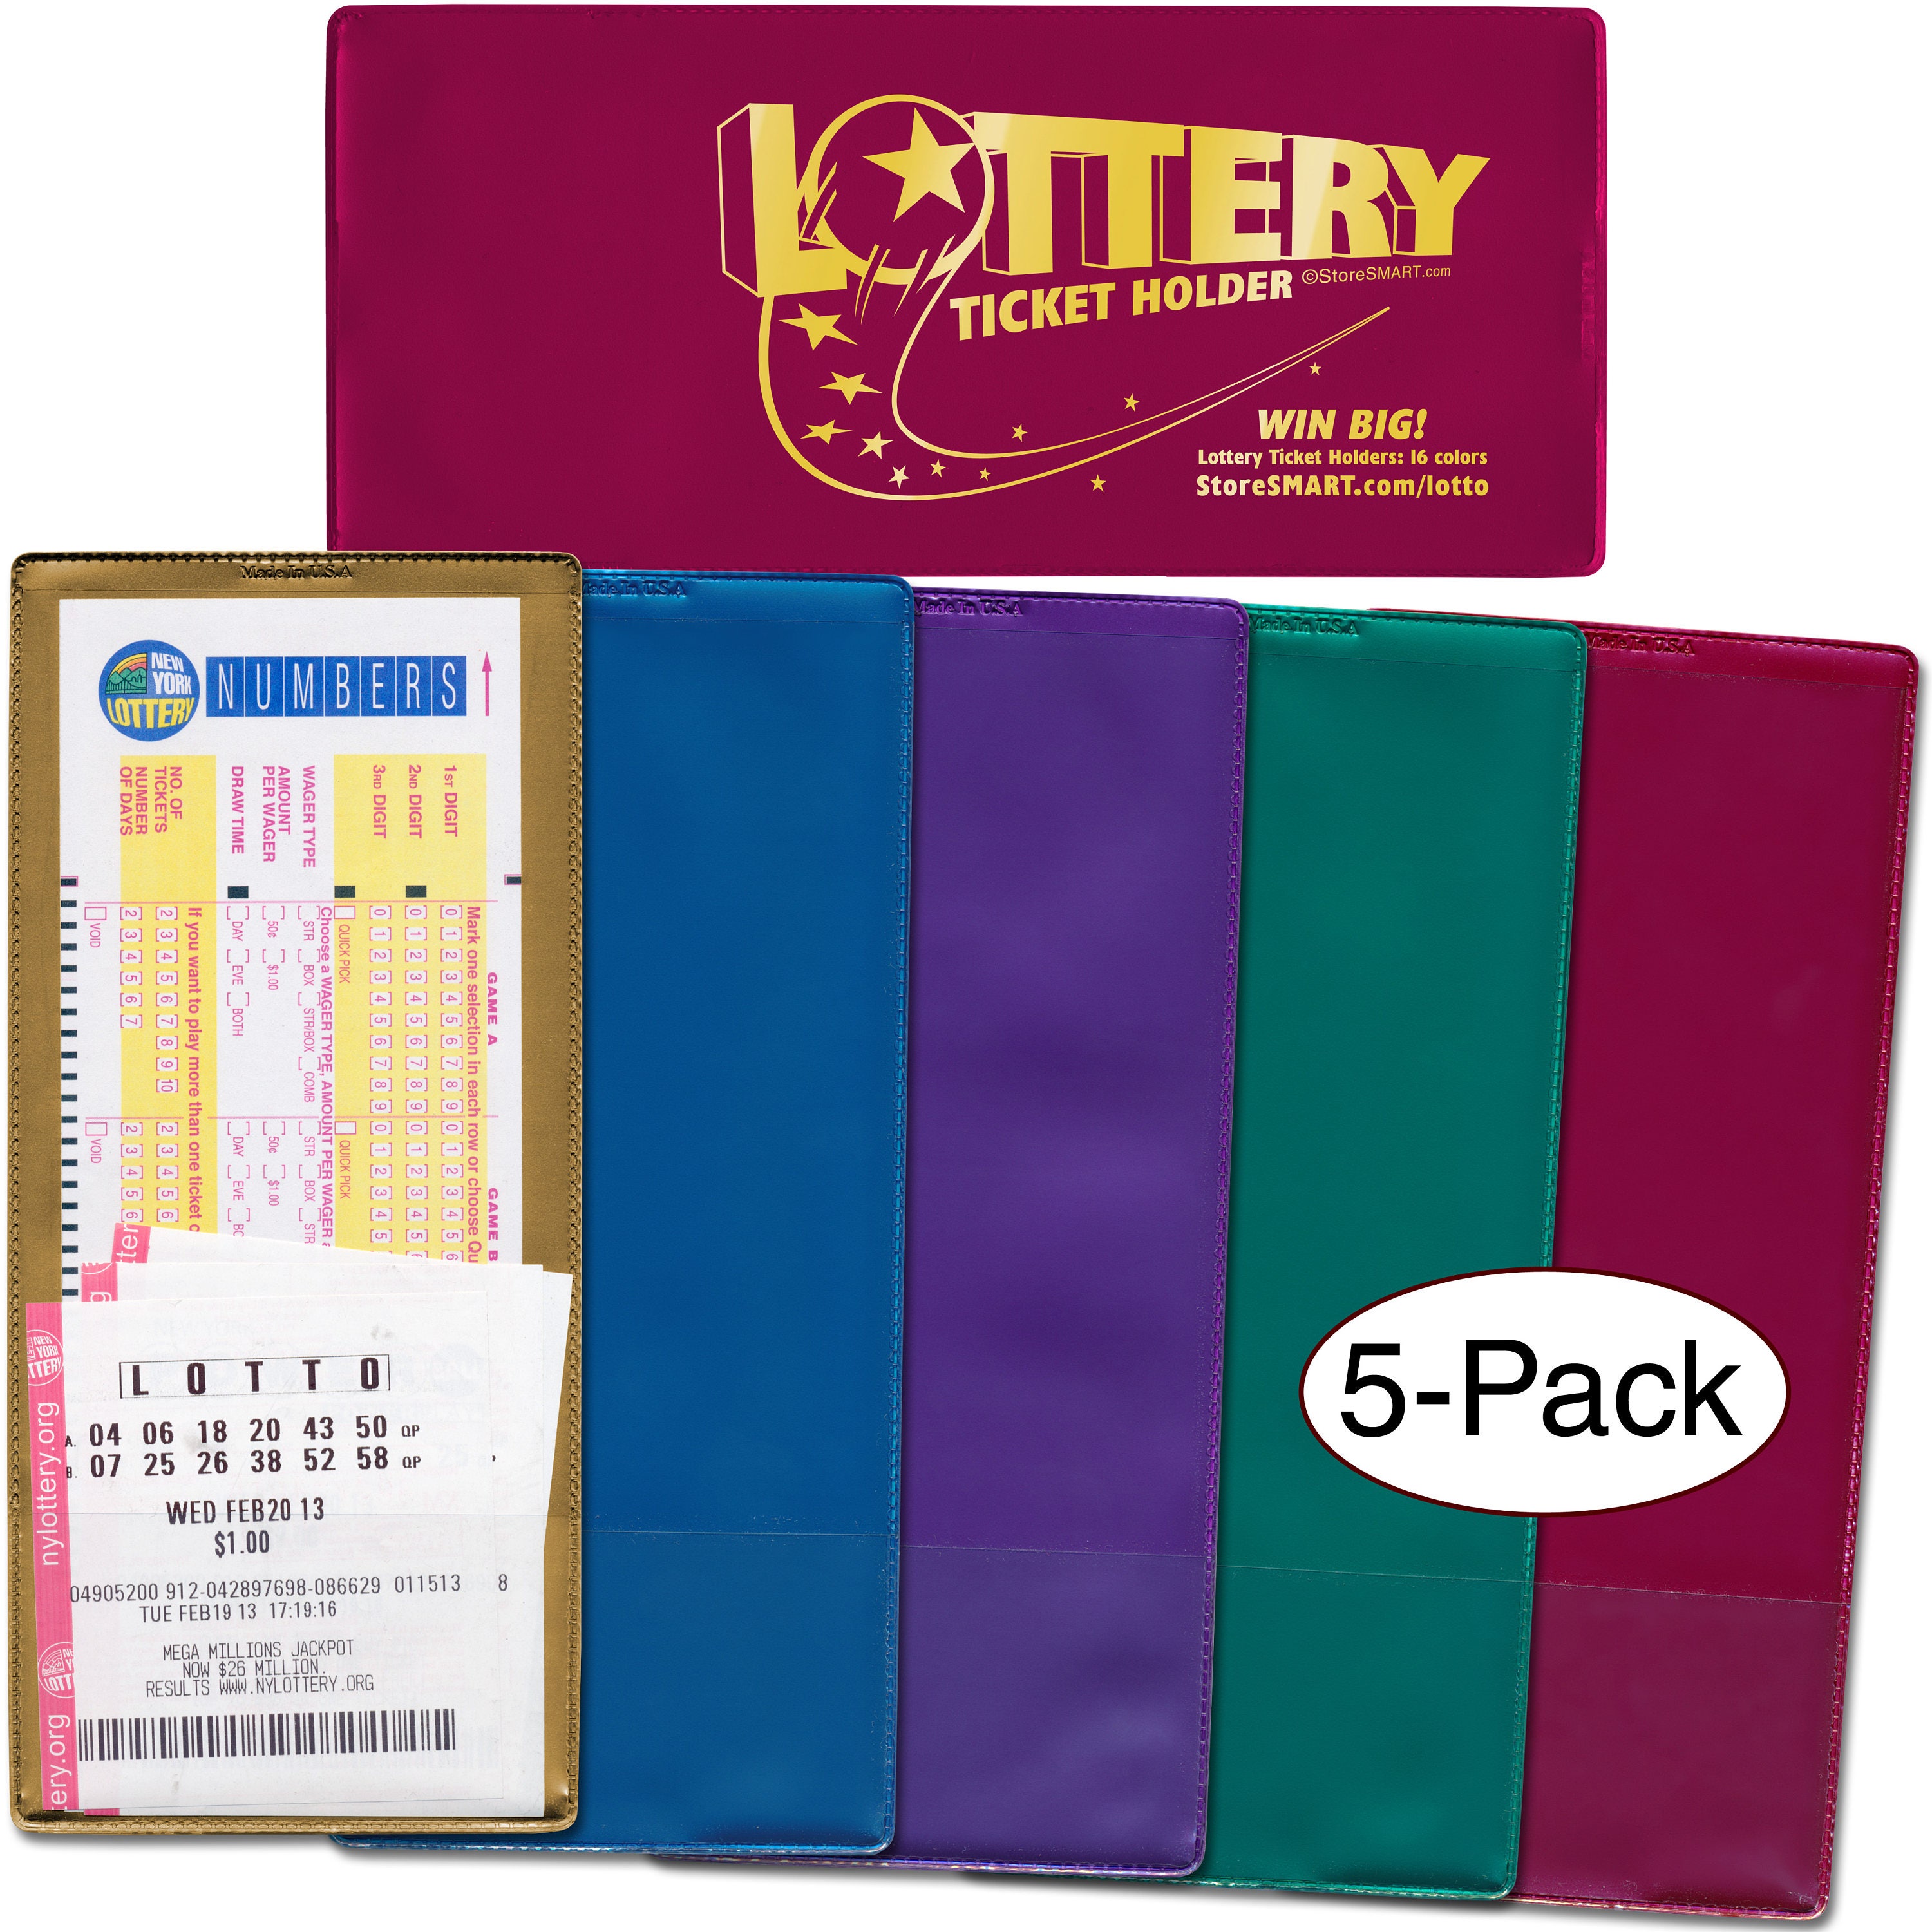 Lotto Ticket Holders 5-Pack - Plastic - Mystic Metal Collection (LTMYS)